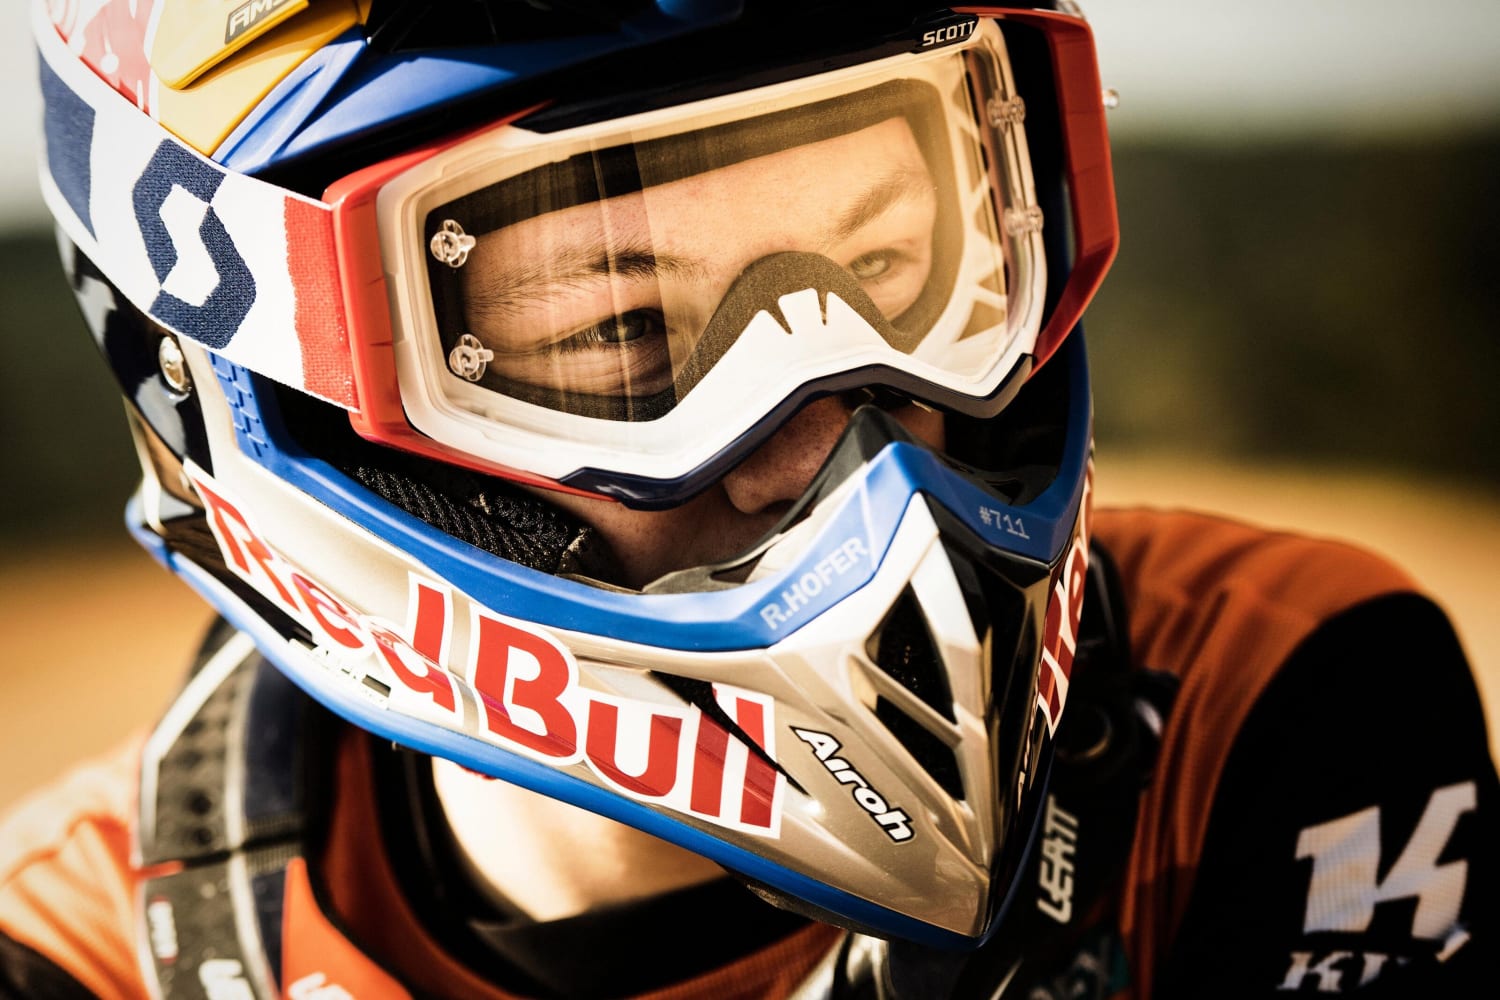 Motocross helmet guide Safety, sizing and tech explained